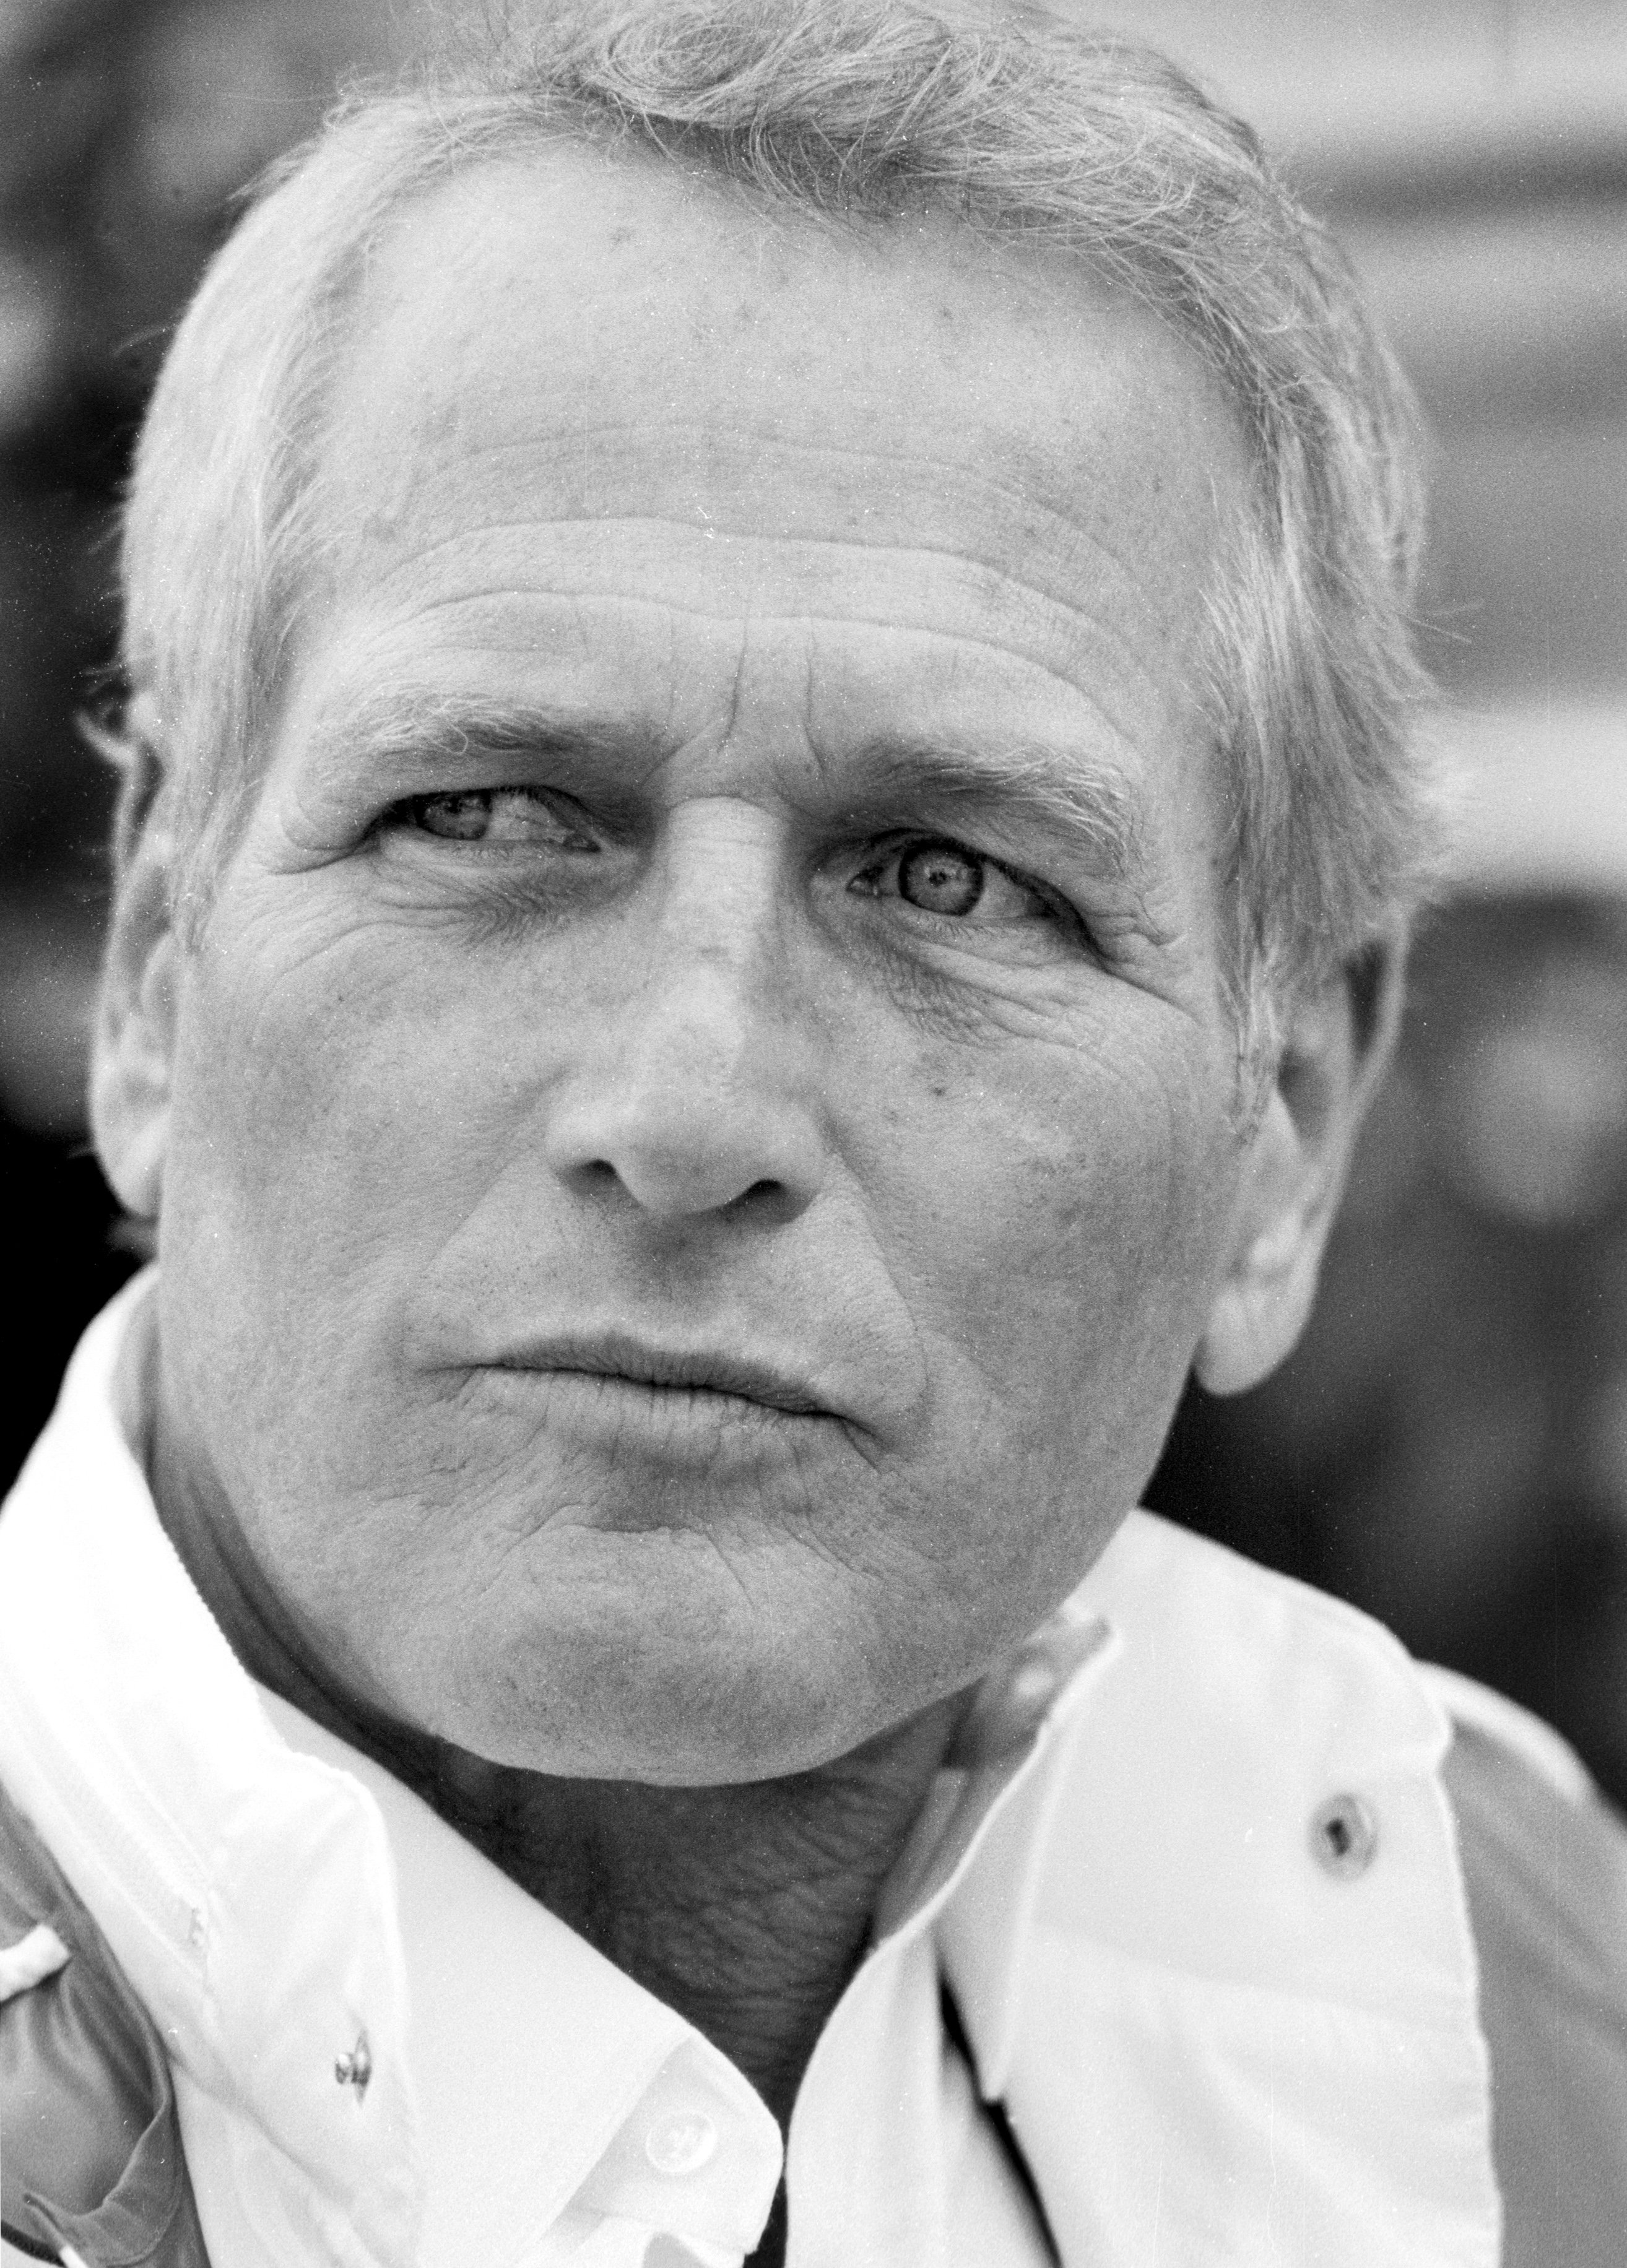 Former race car driver Paul Newman at the Indy 500 in May 1984 in Indianapolis, Indiana. / Source: Getty Images